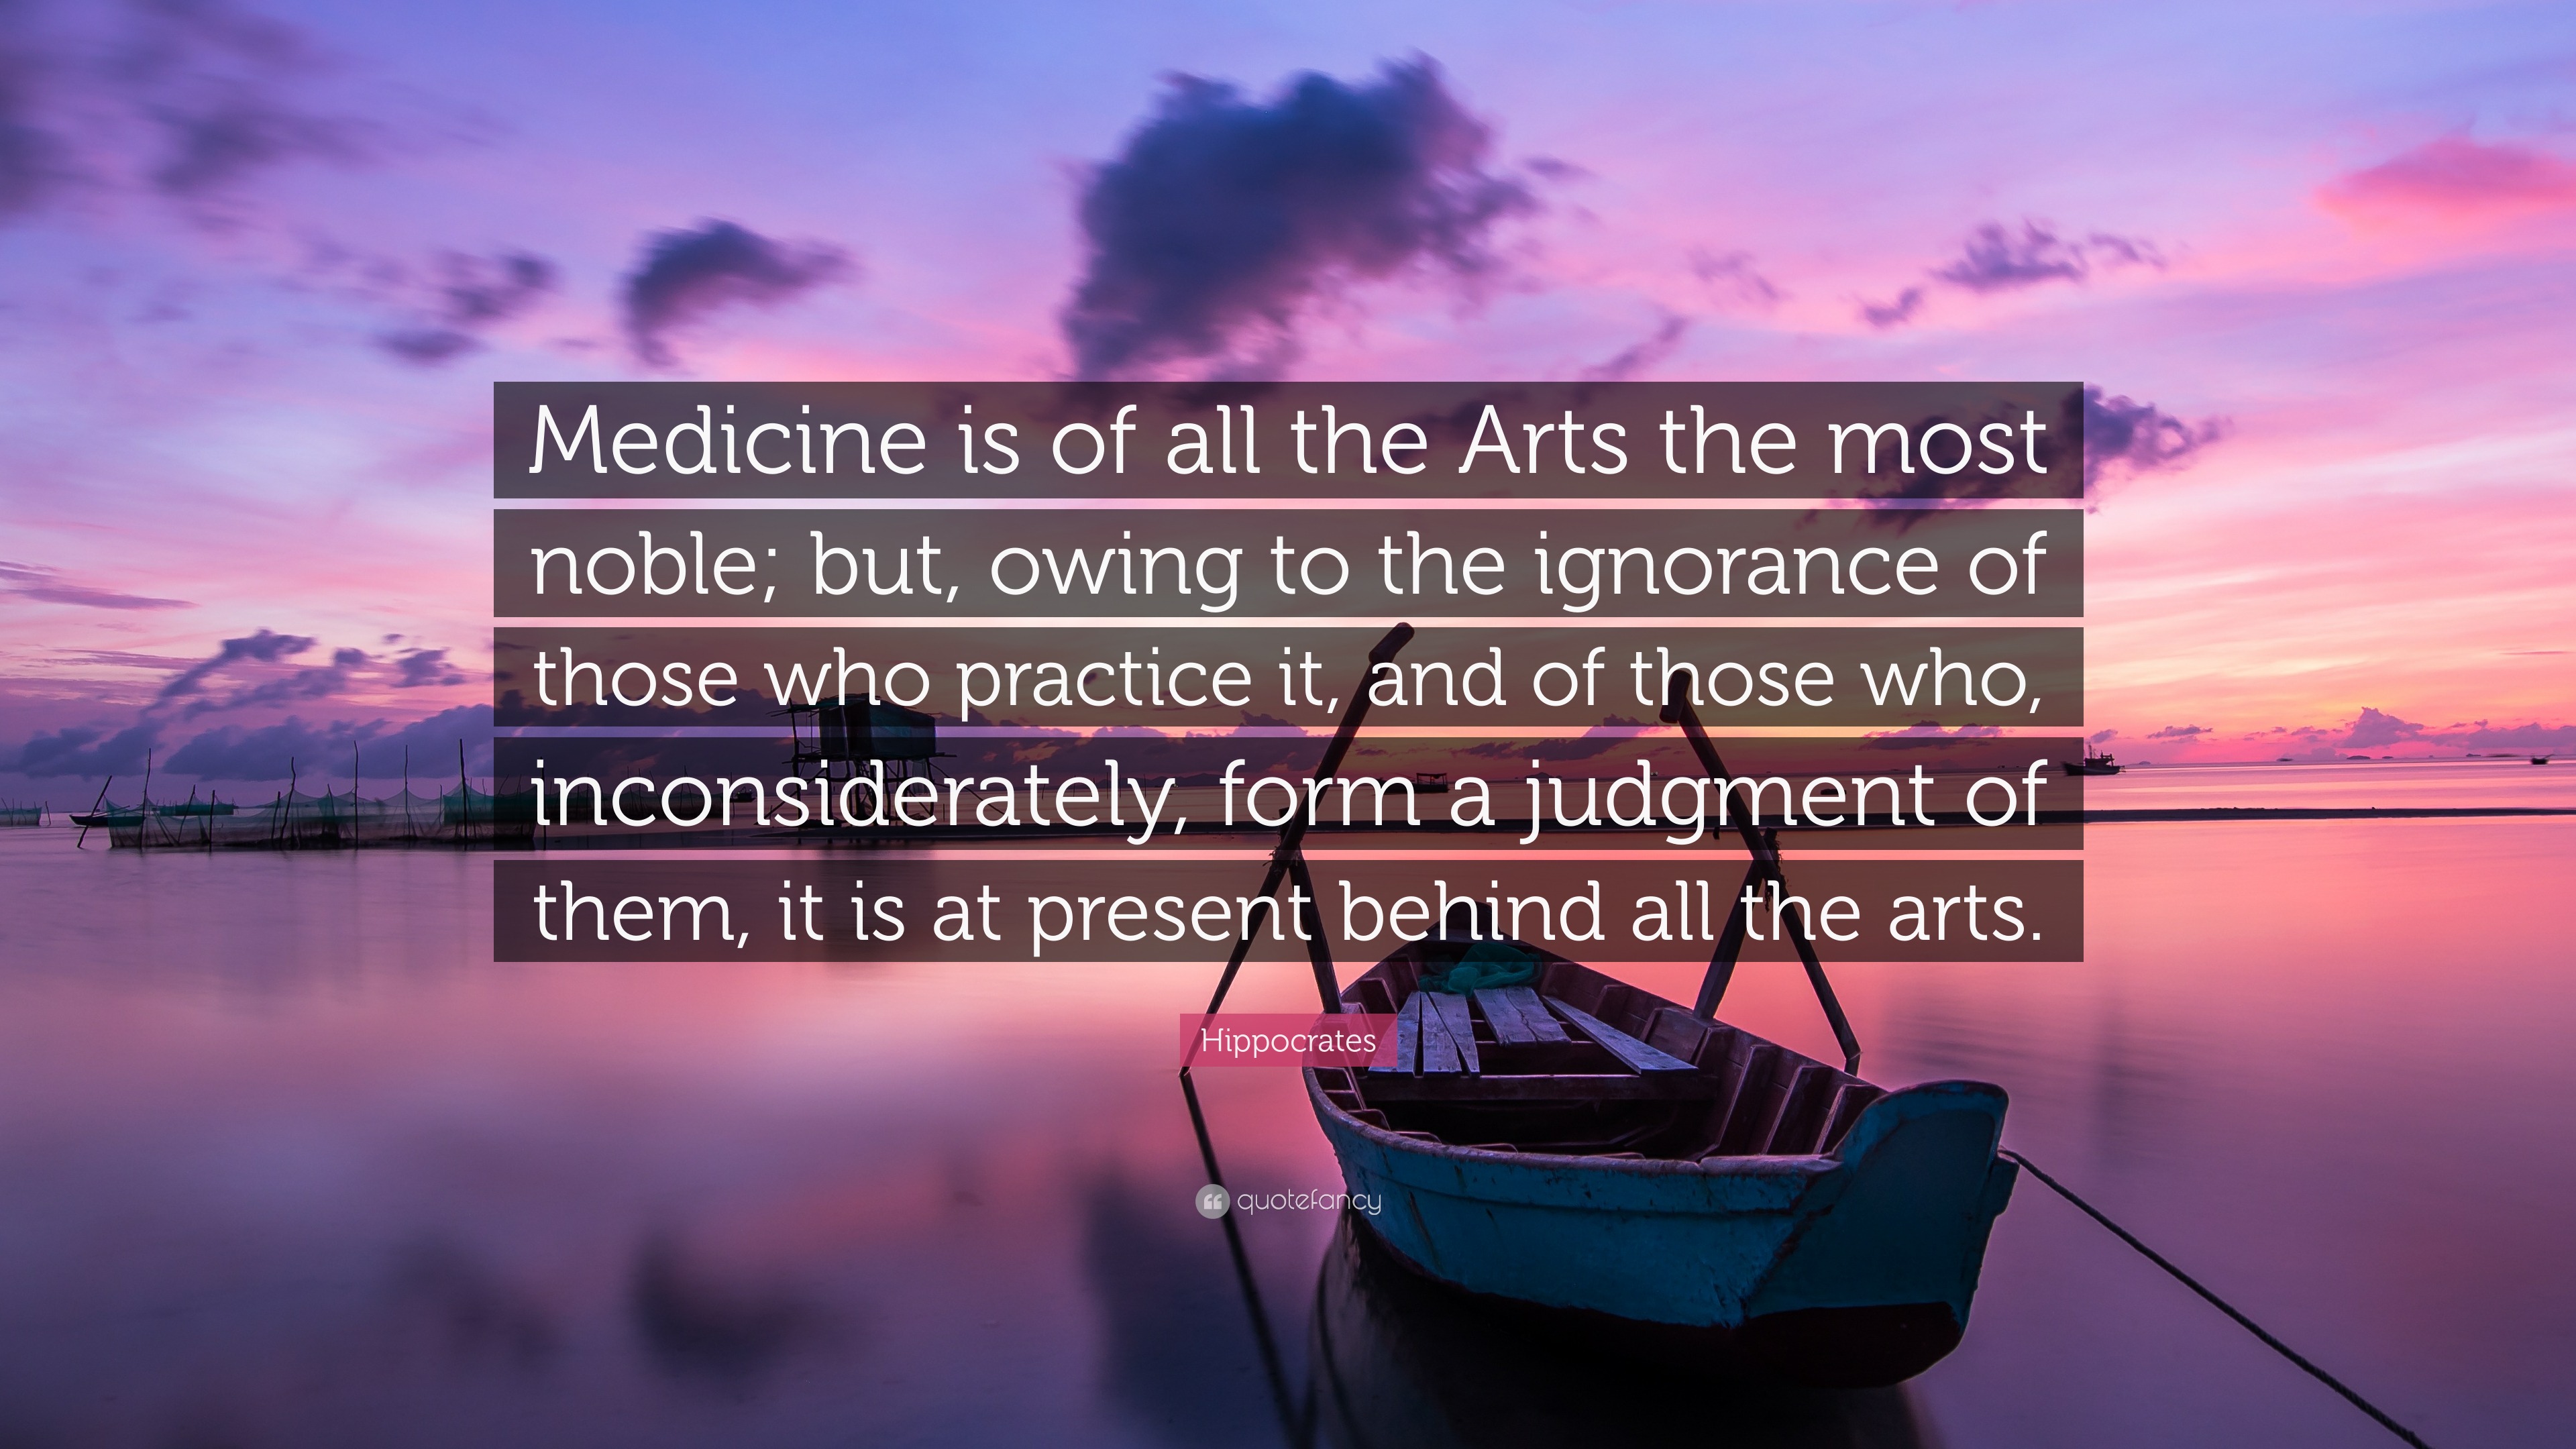 Hippocrates Quote: “Medicine is of all the Arts the most noble; but